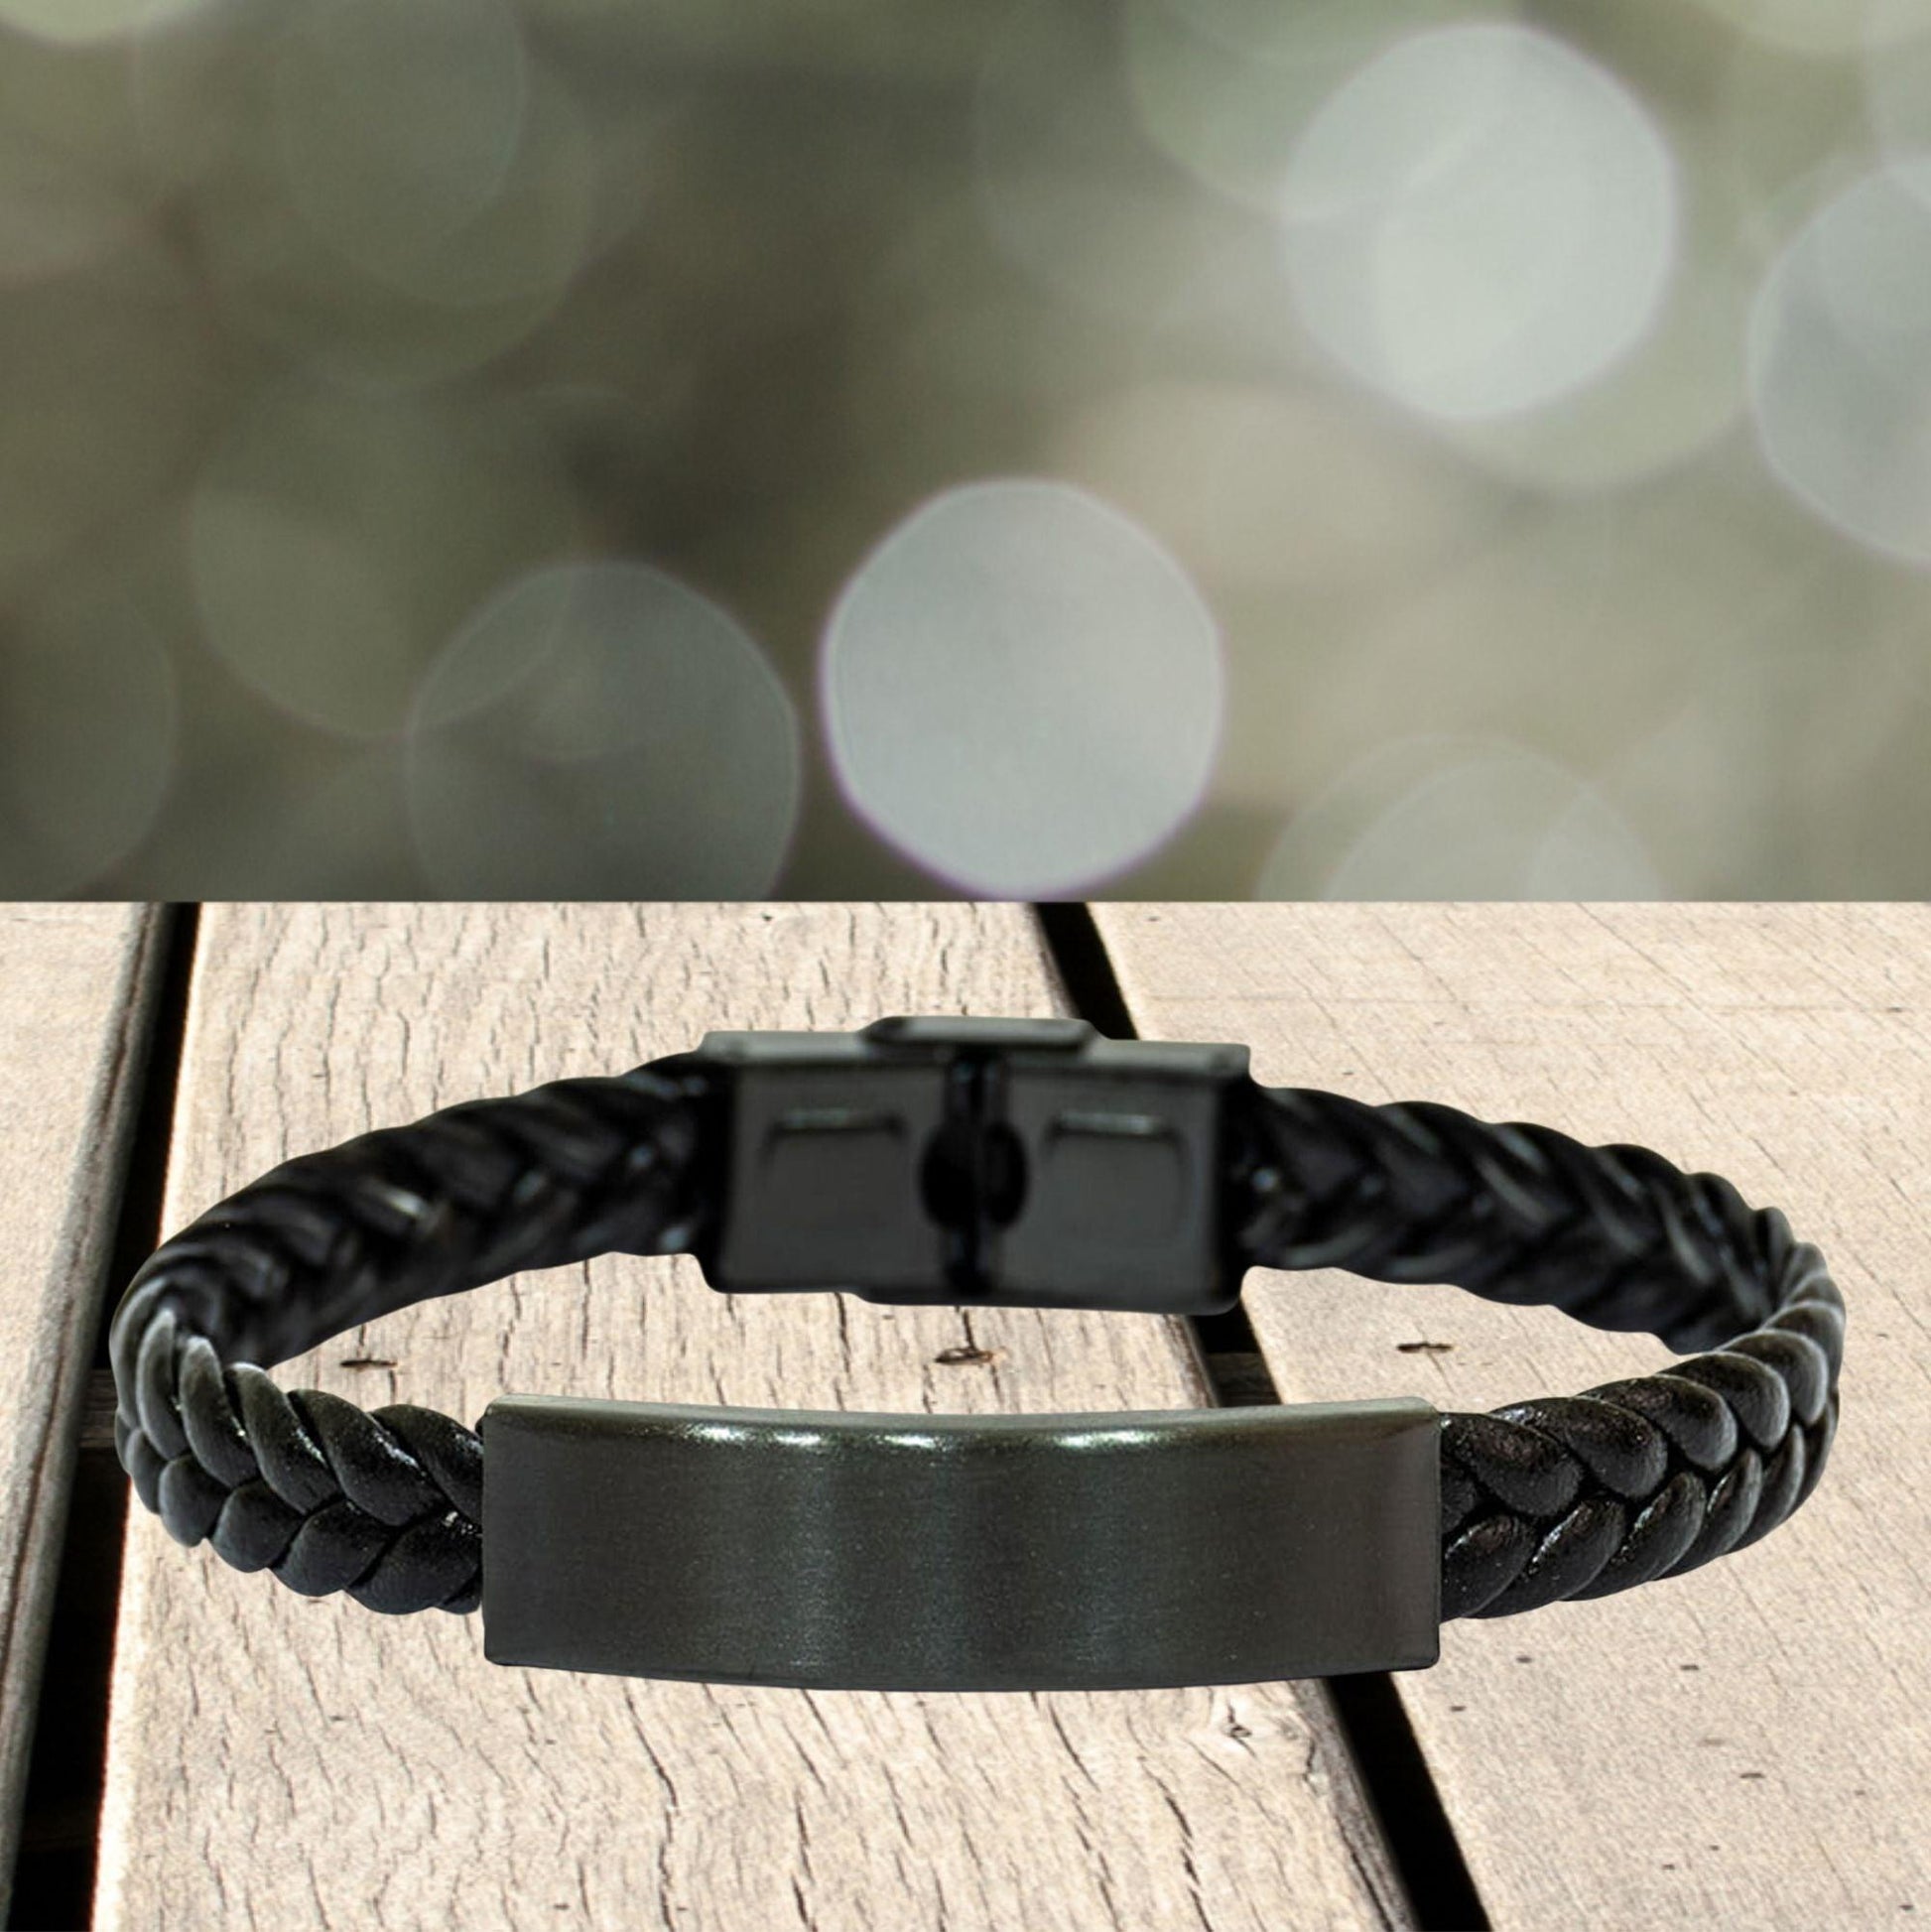 Grandma Christmas Perfect Gifts, Grandma Braided Leather Bracelet, Motivational Grandma Engraved Gifts, Birthday Gifts For Grandma, To My Grandma Life is learning to dance in the rain, finding good in each day. I'm always with you - Mallard Moon Gift Shop